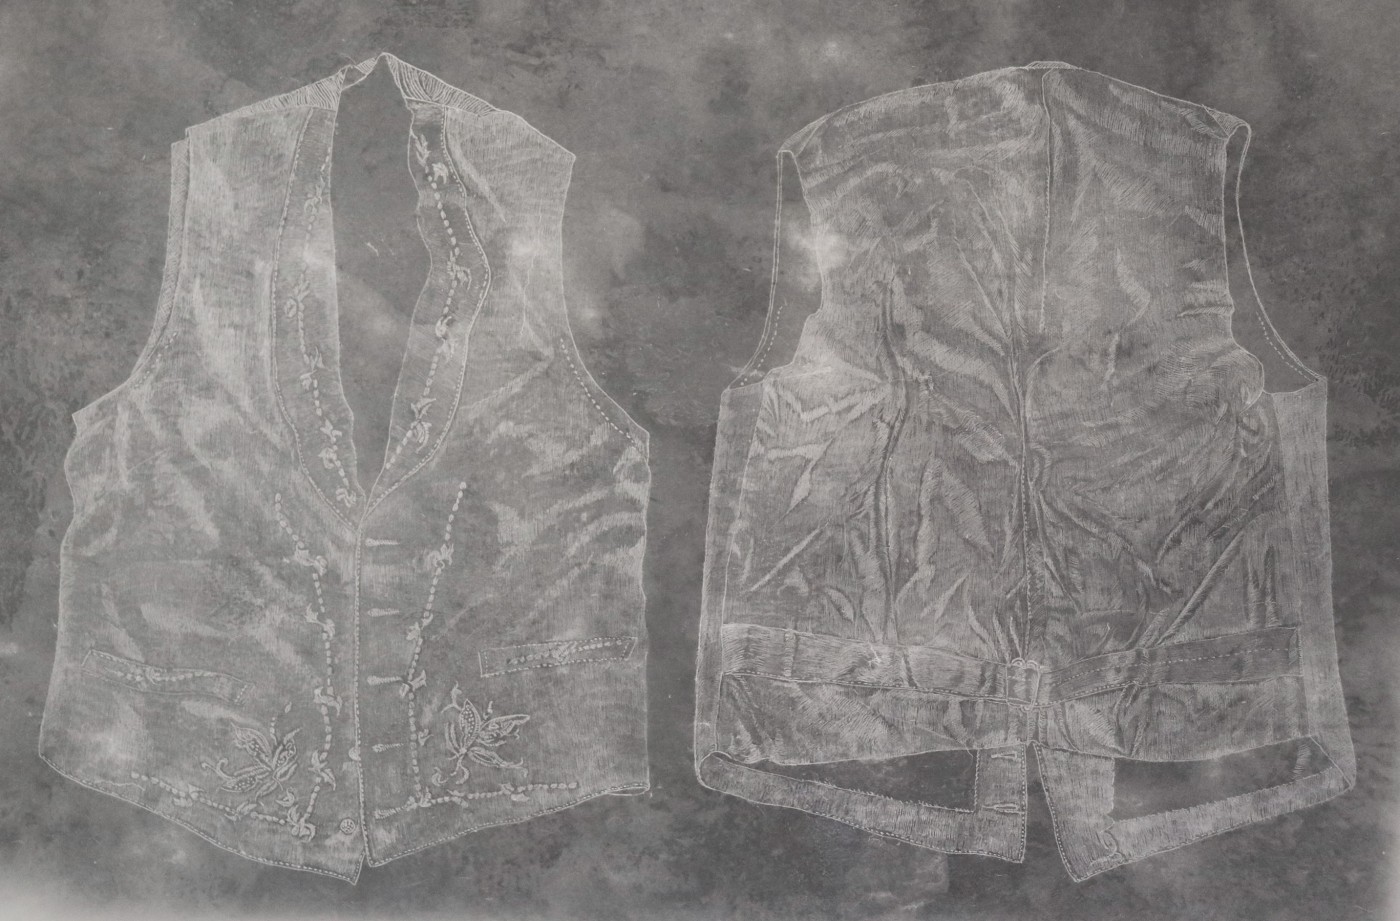 Figure 5: Etched waxed paper artwork of Ruskin’s waistcoat by Sarah Casey. Image courtesy of  Sarah Casey.